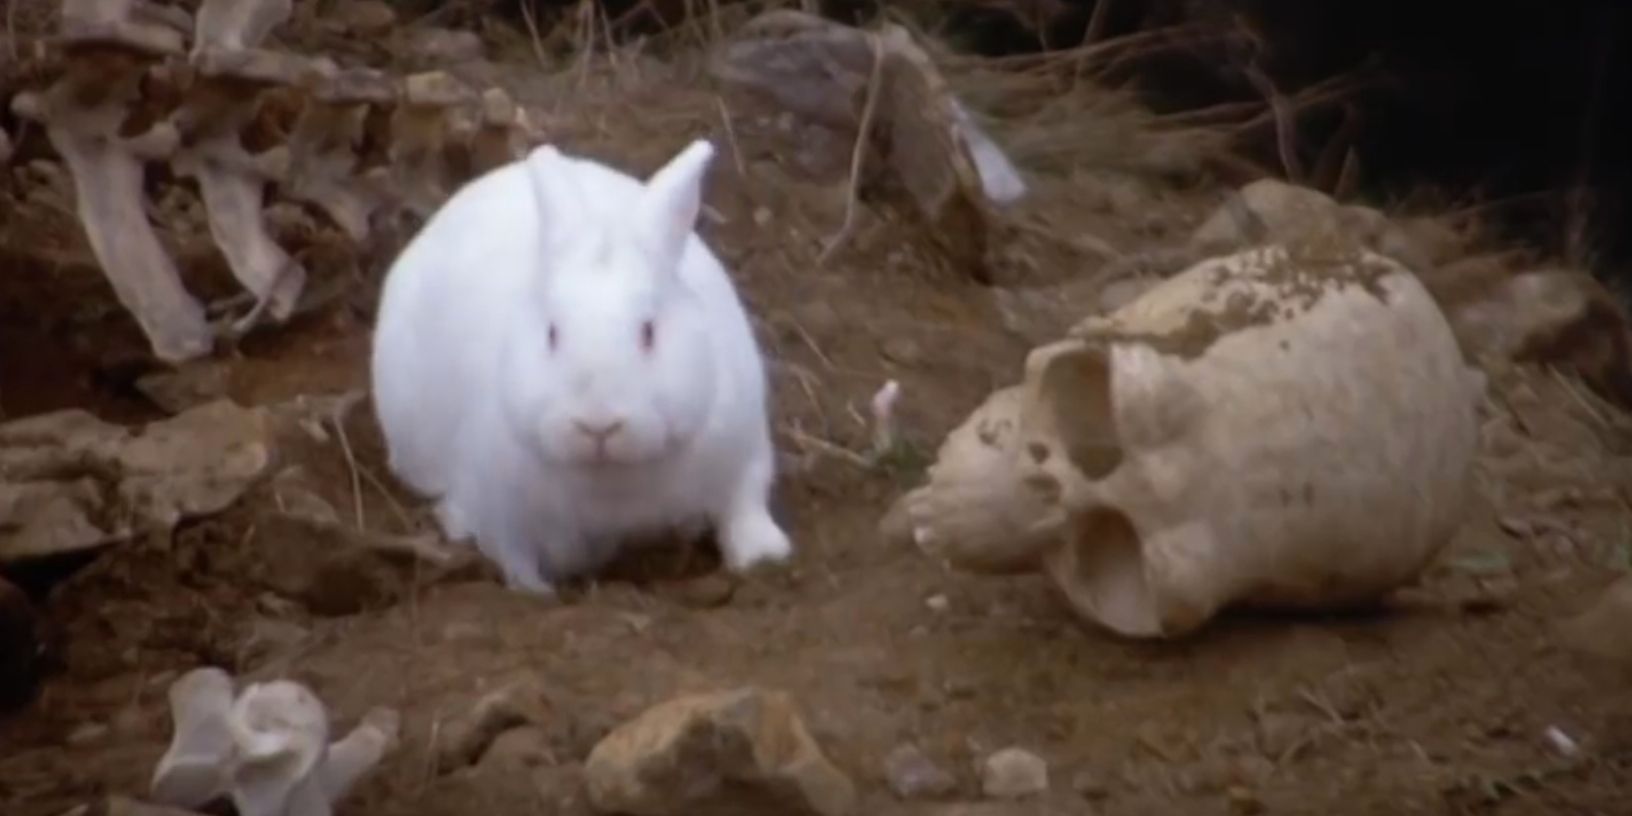 The Killer Rabbit in Monty Python and the Holy Grail